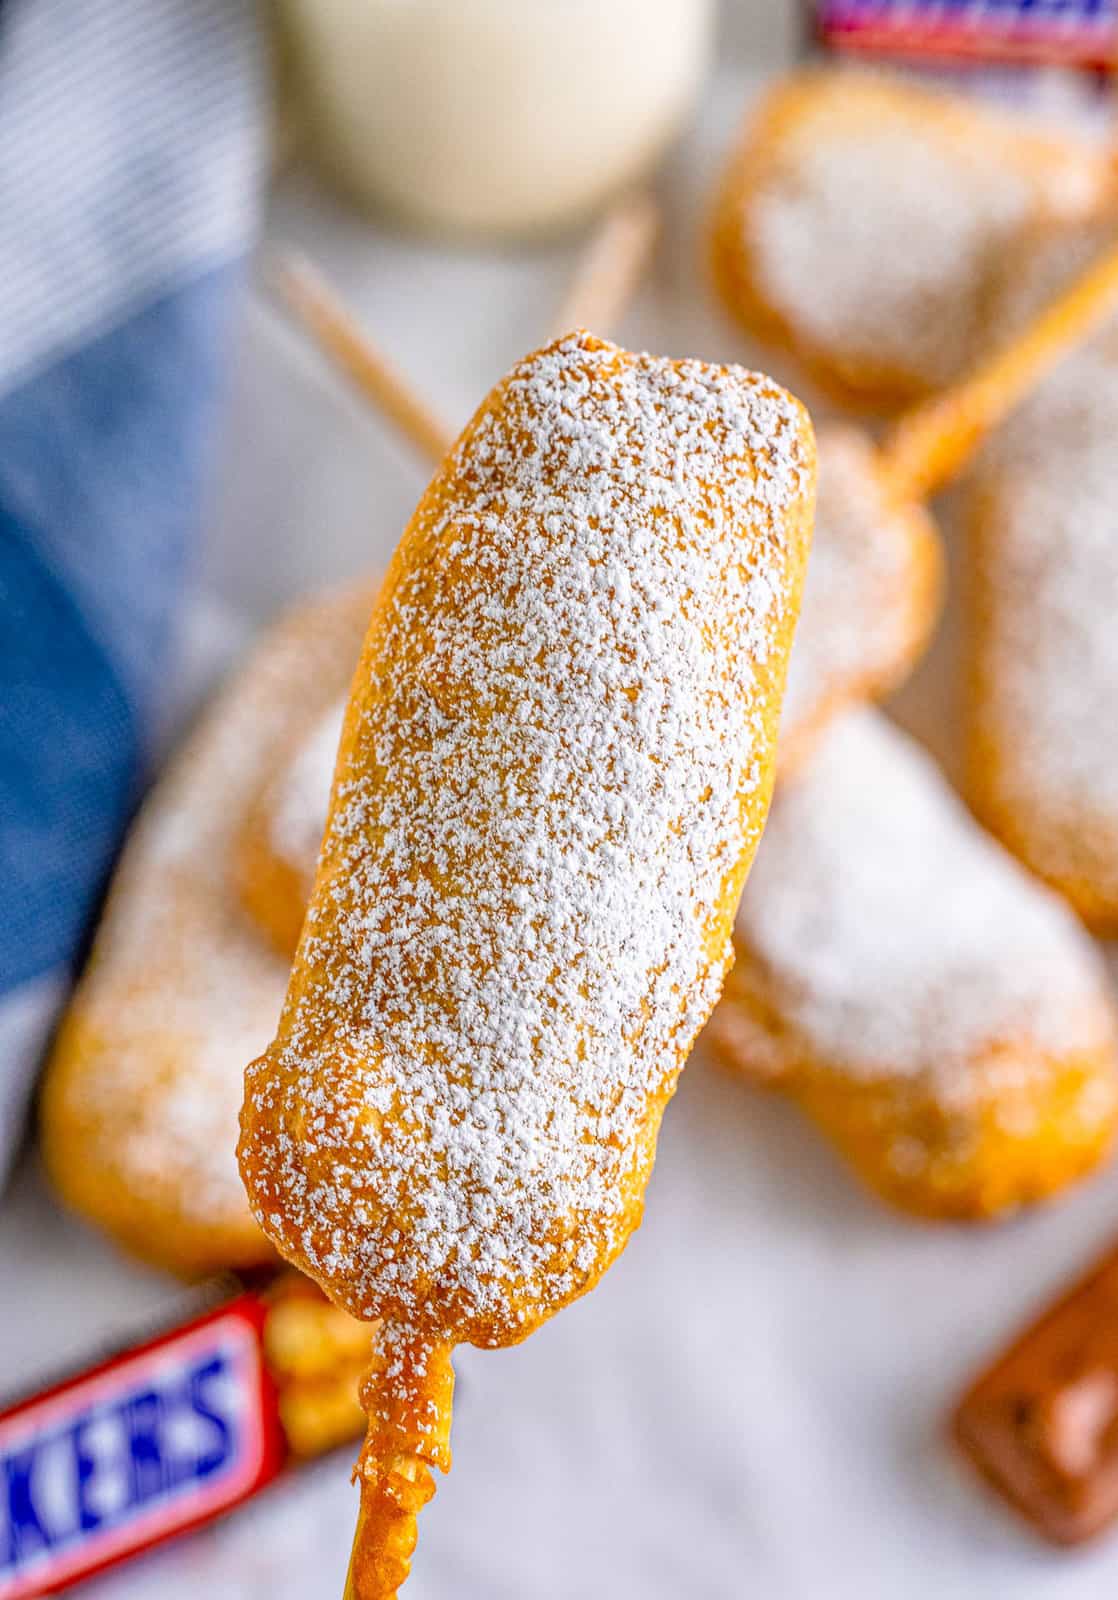 Hand holding up one Deep Fried Snickers showing powdered sugar.